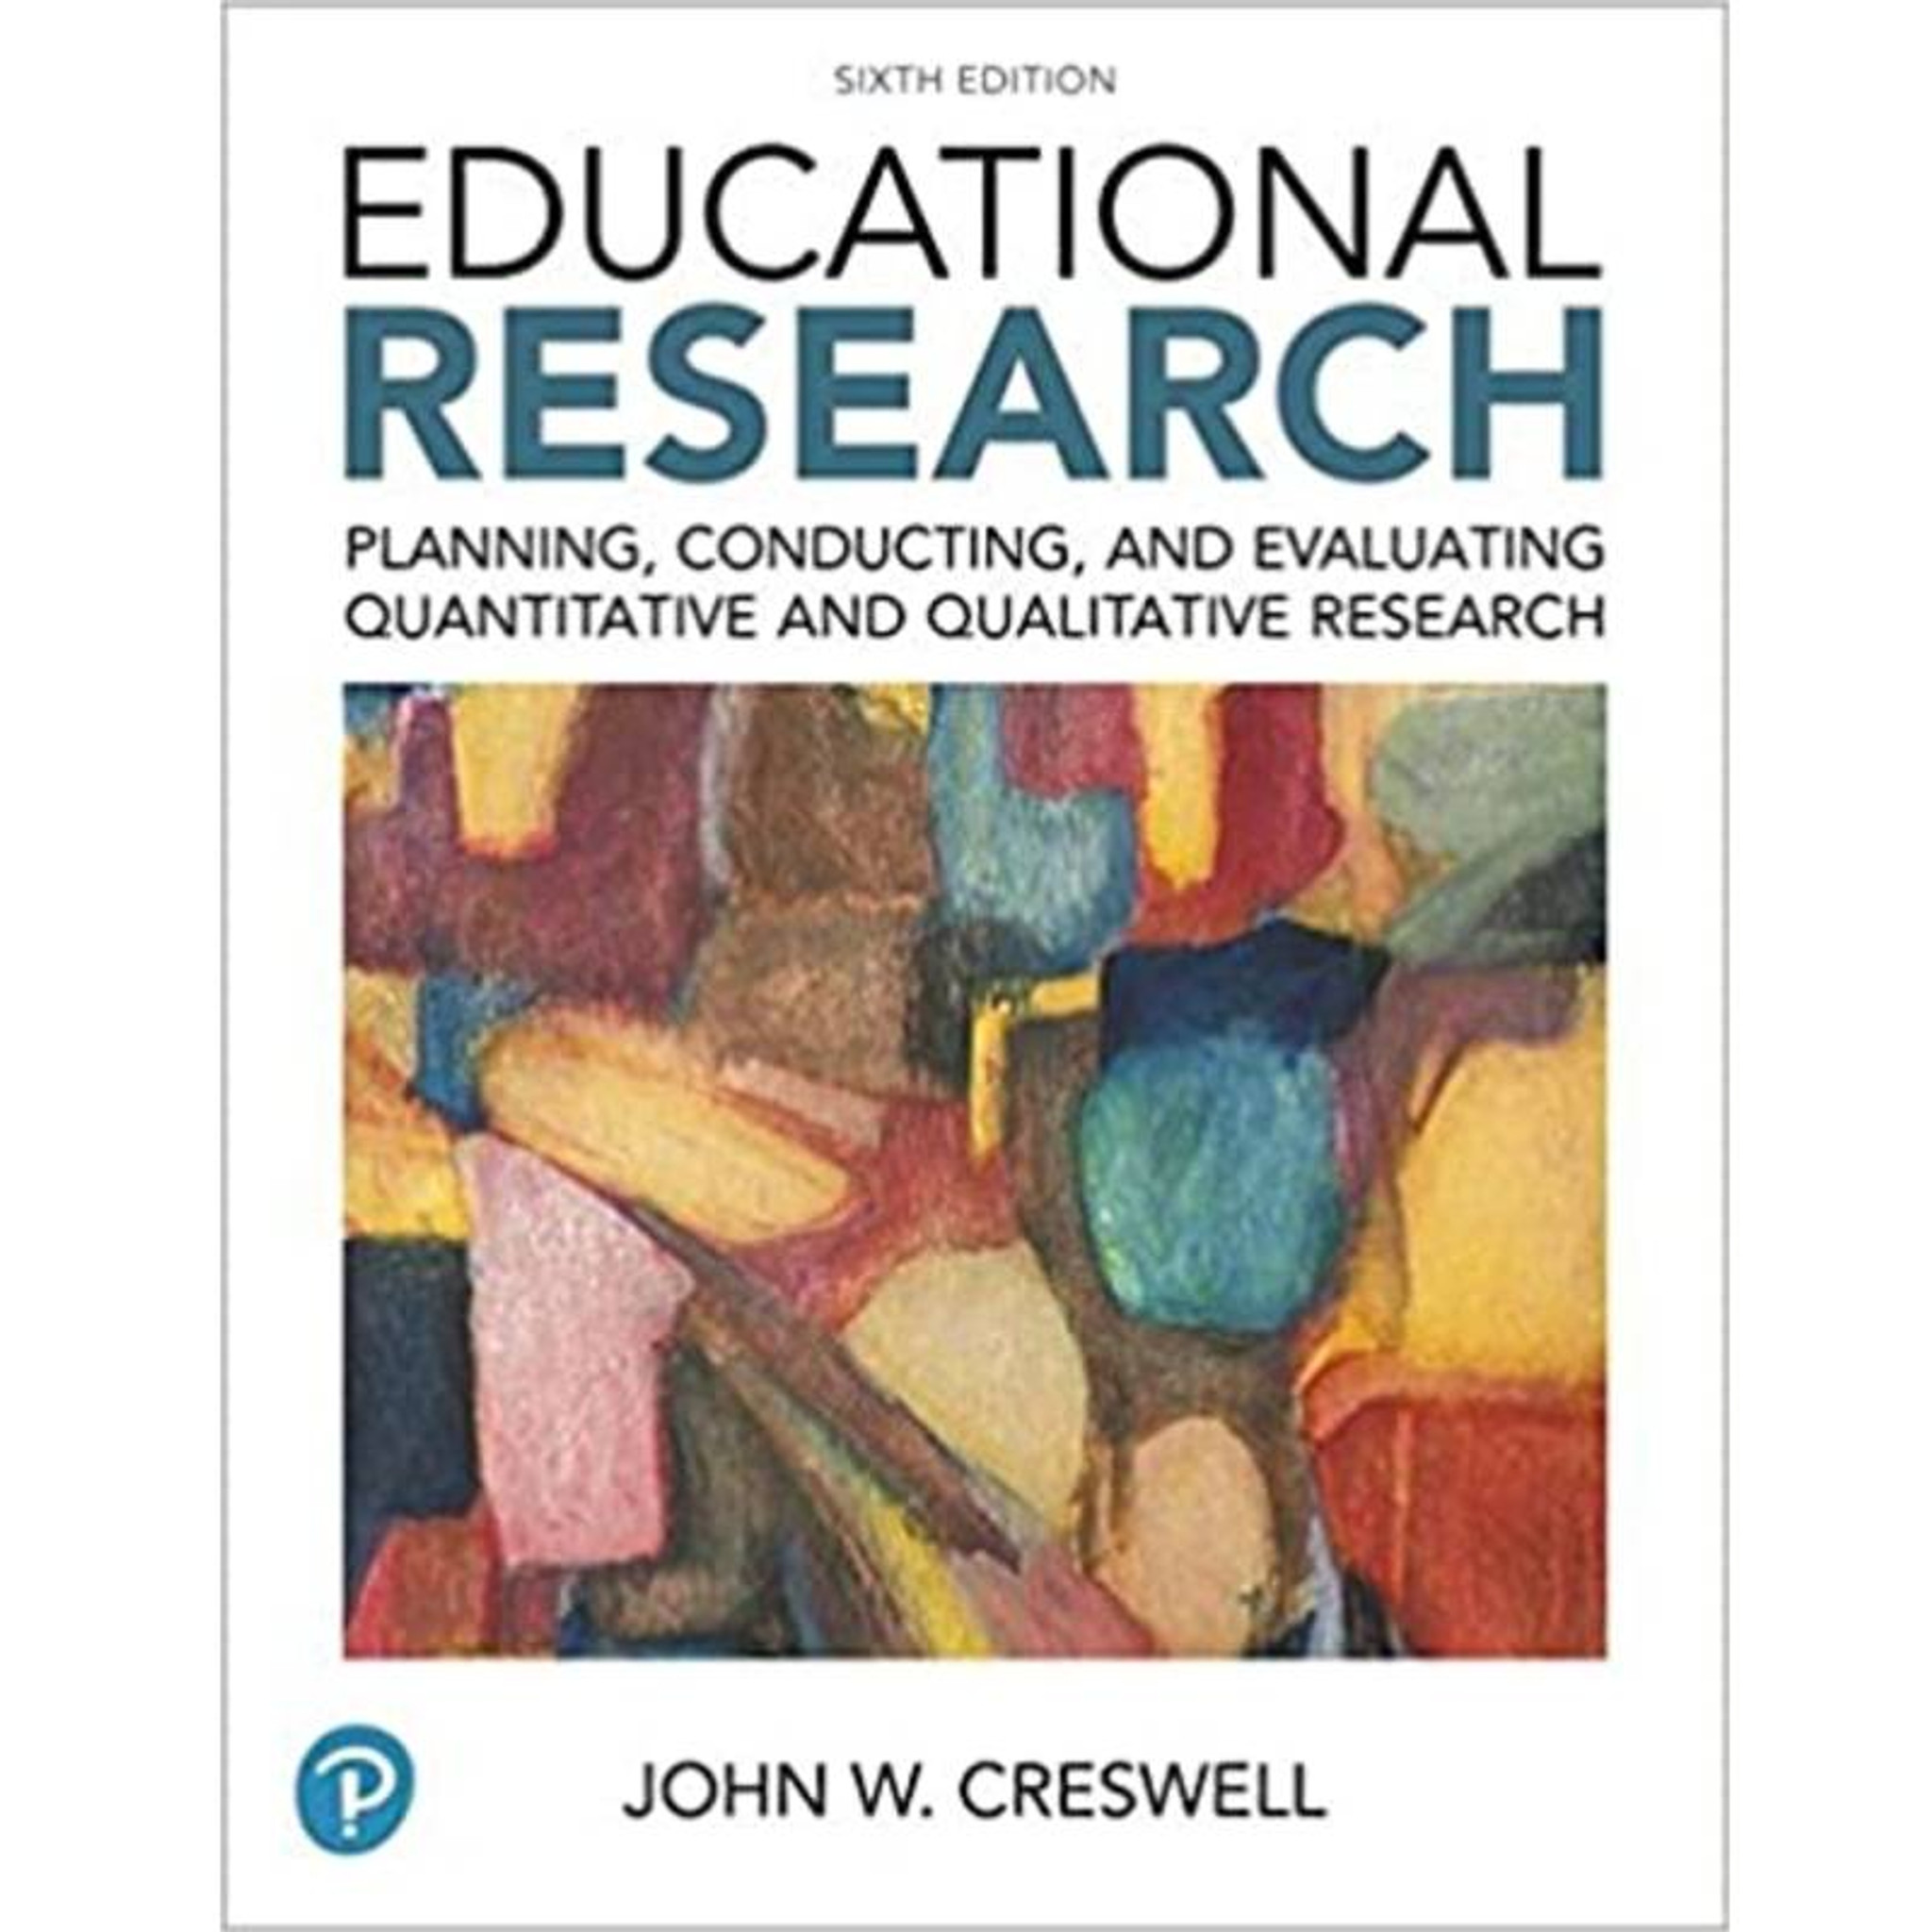 qualitative research by creswell